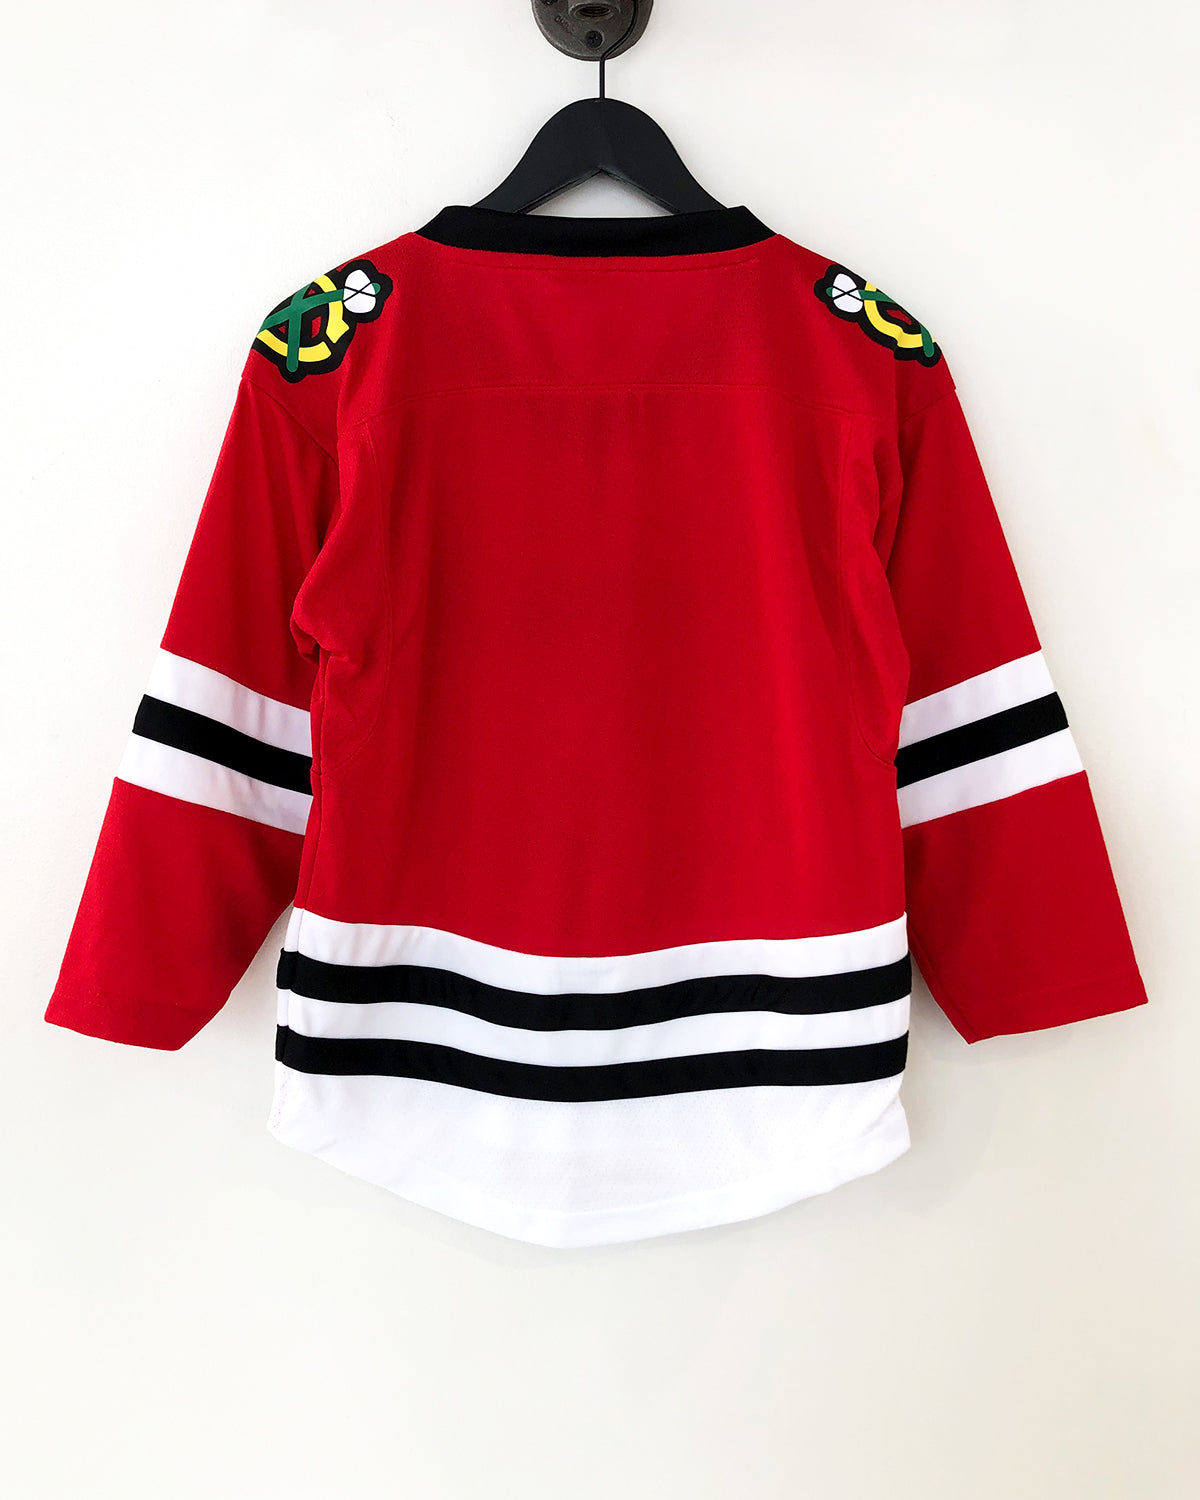 Outerstuff Youth Chicago Blackhawks Blank Home Replica Jersey